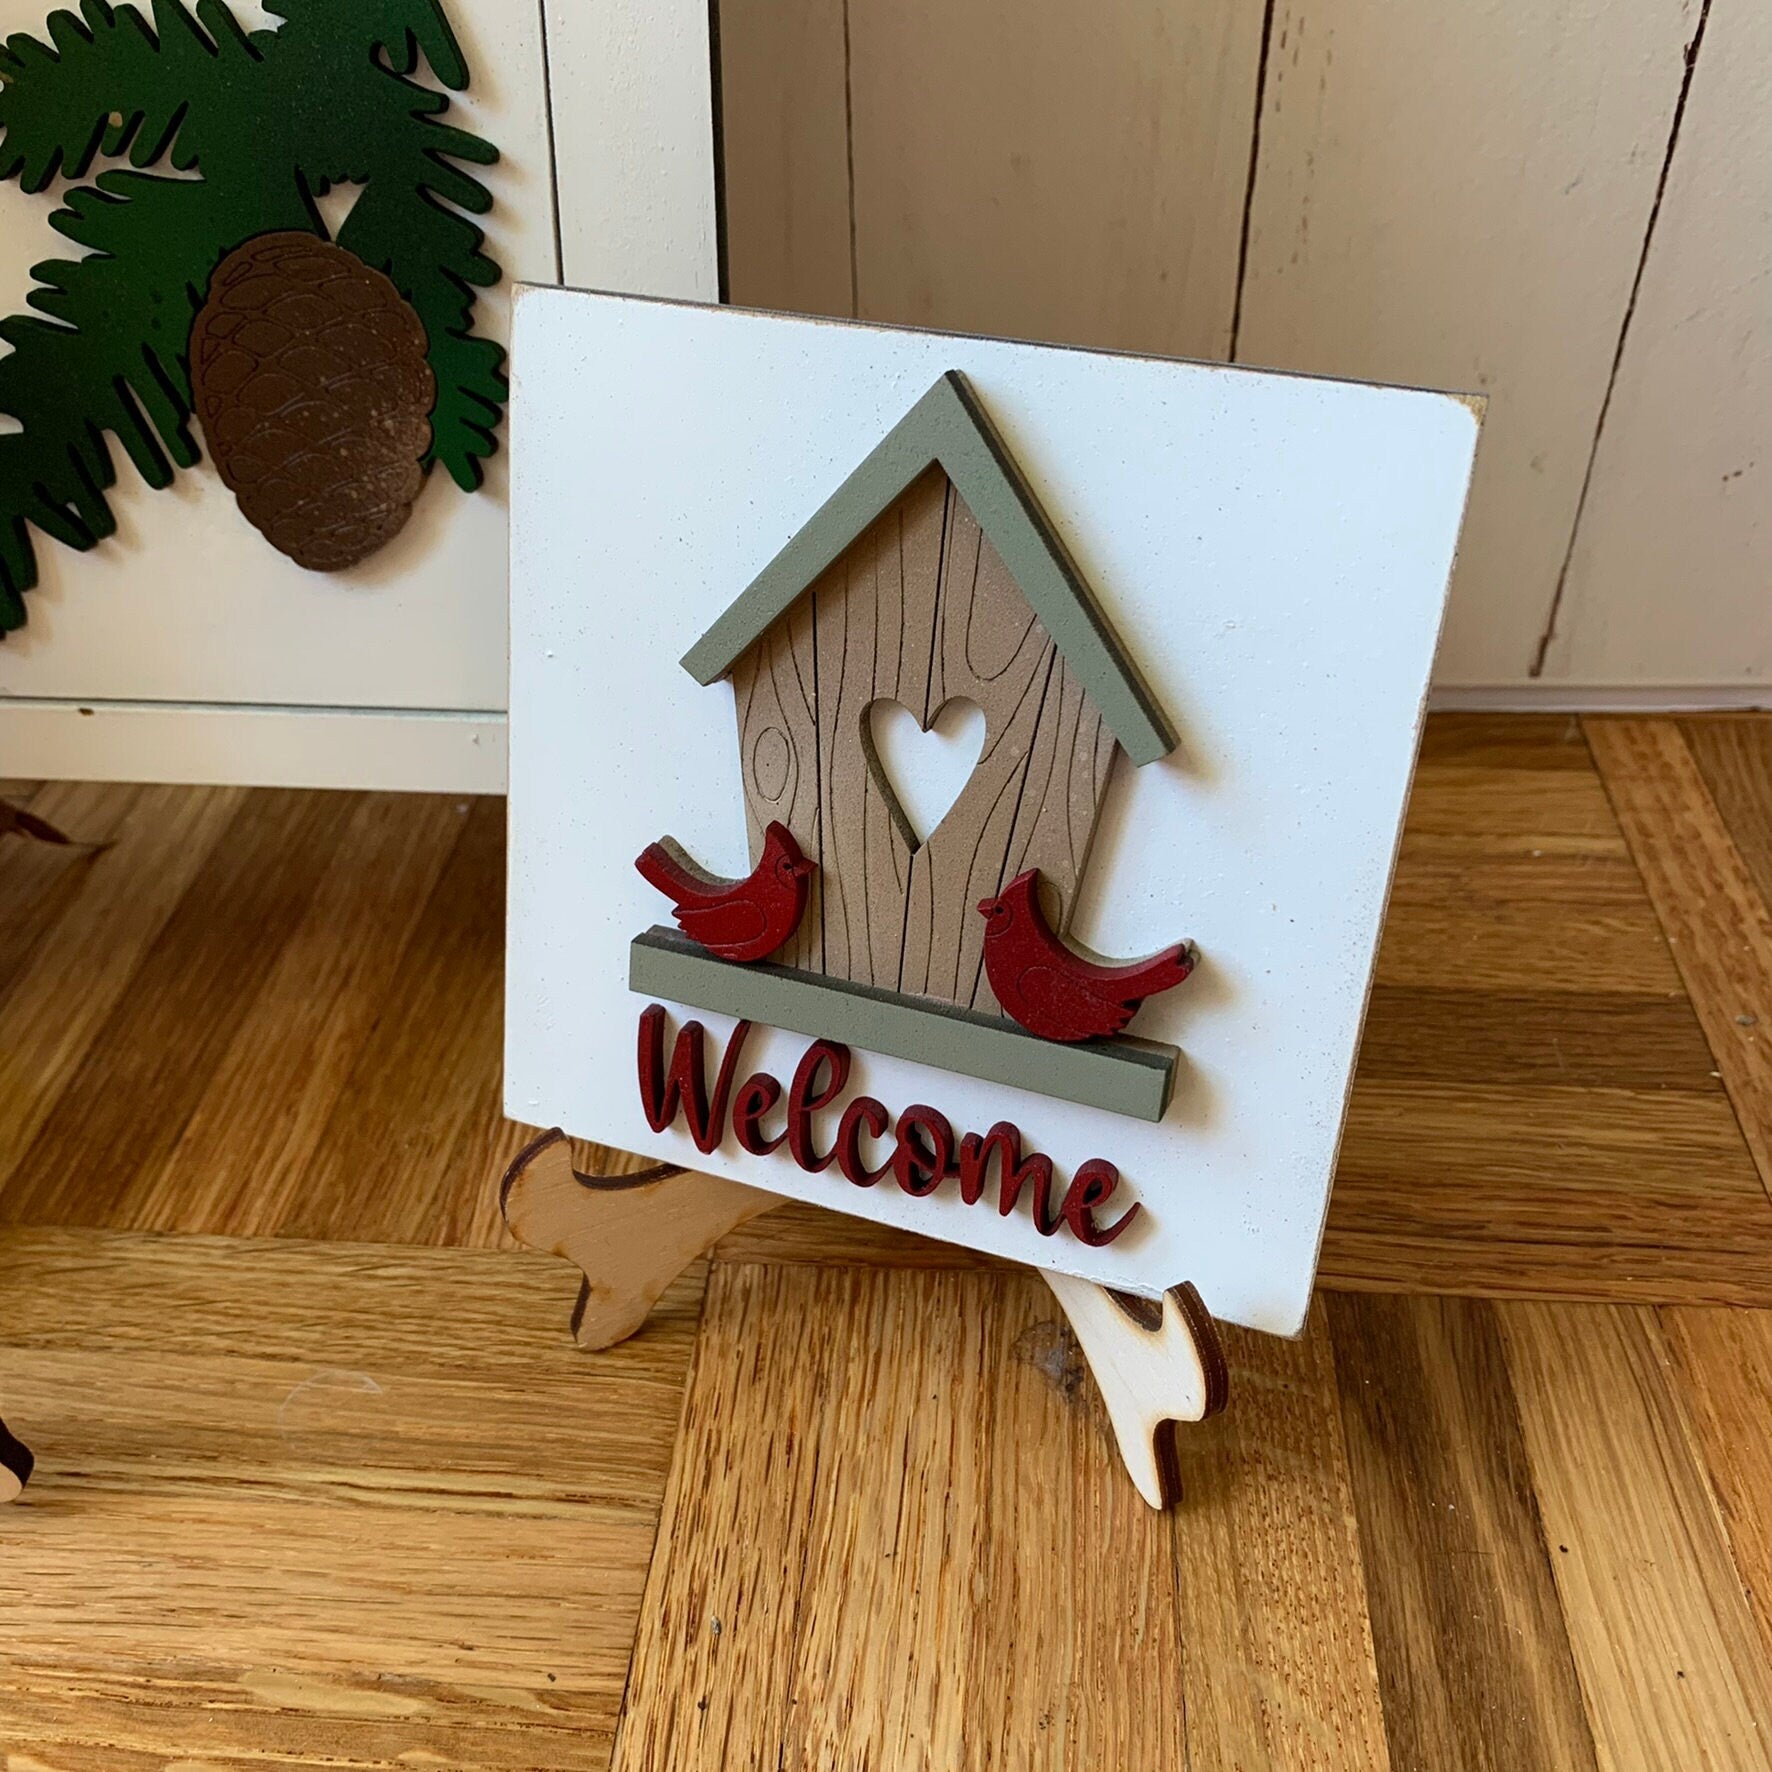 Farmhouse Christmas Interchangeable Signs - Laser Cut Wood Painted